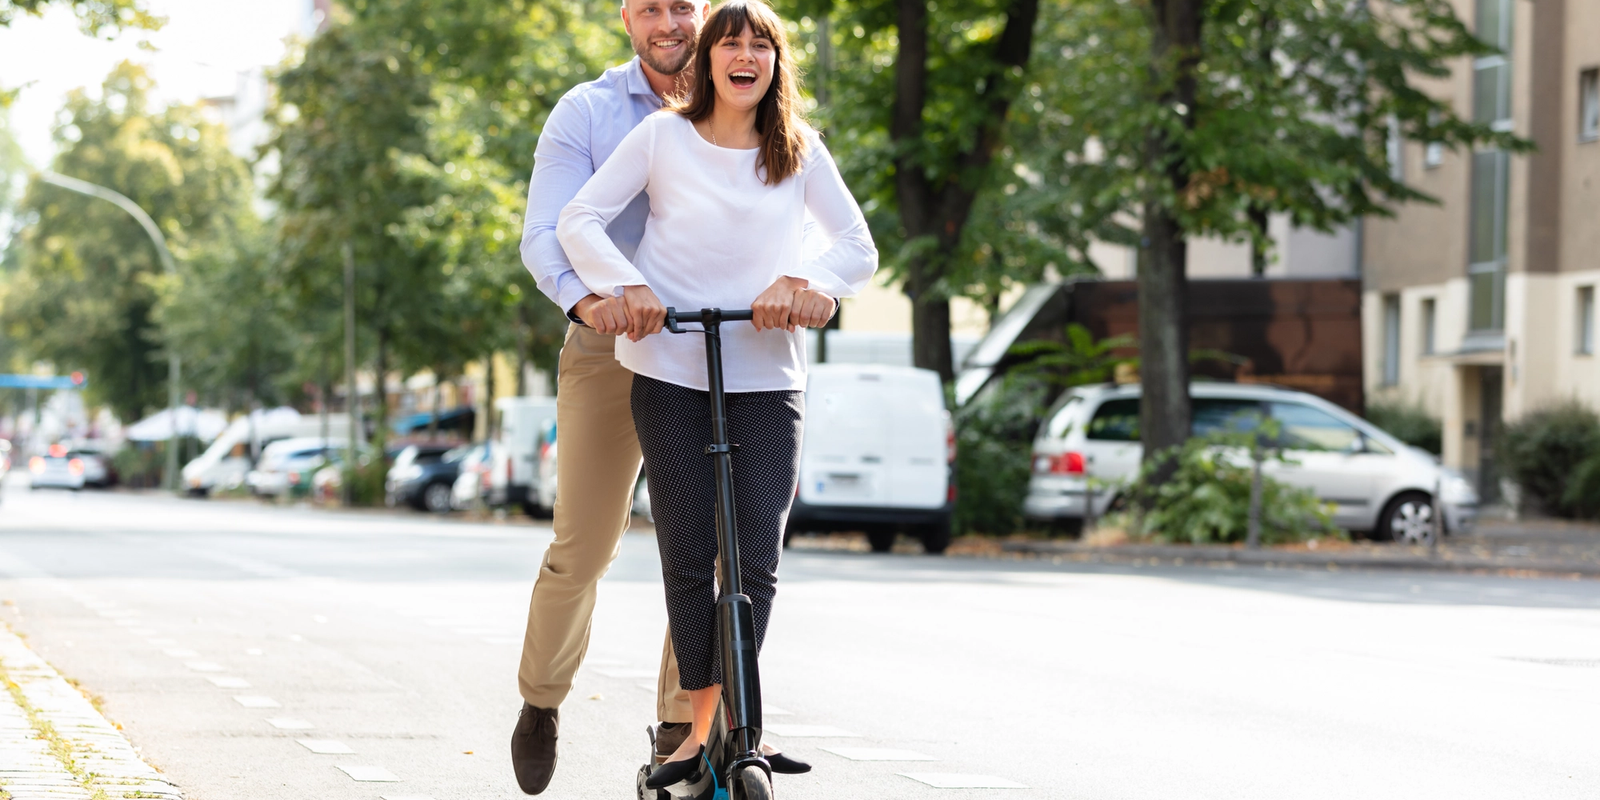 Can You Carry a Passenger on an Electric Scooter?